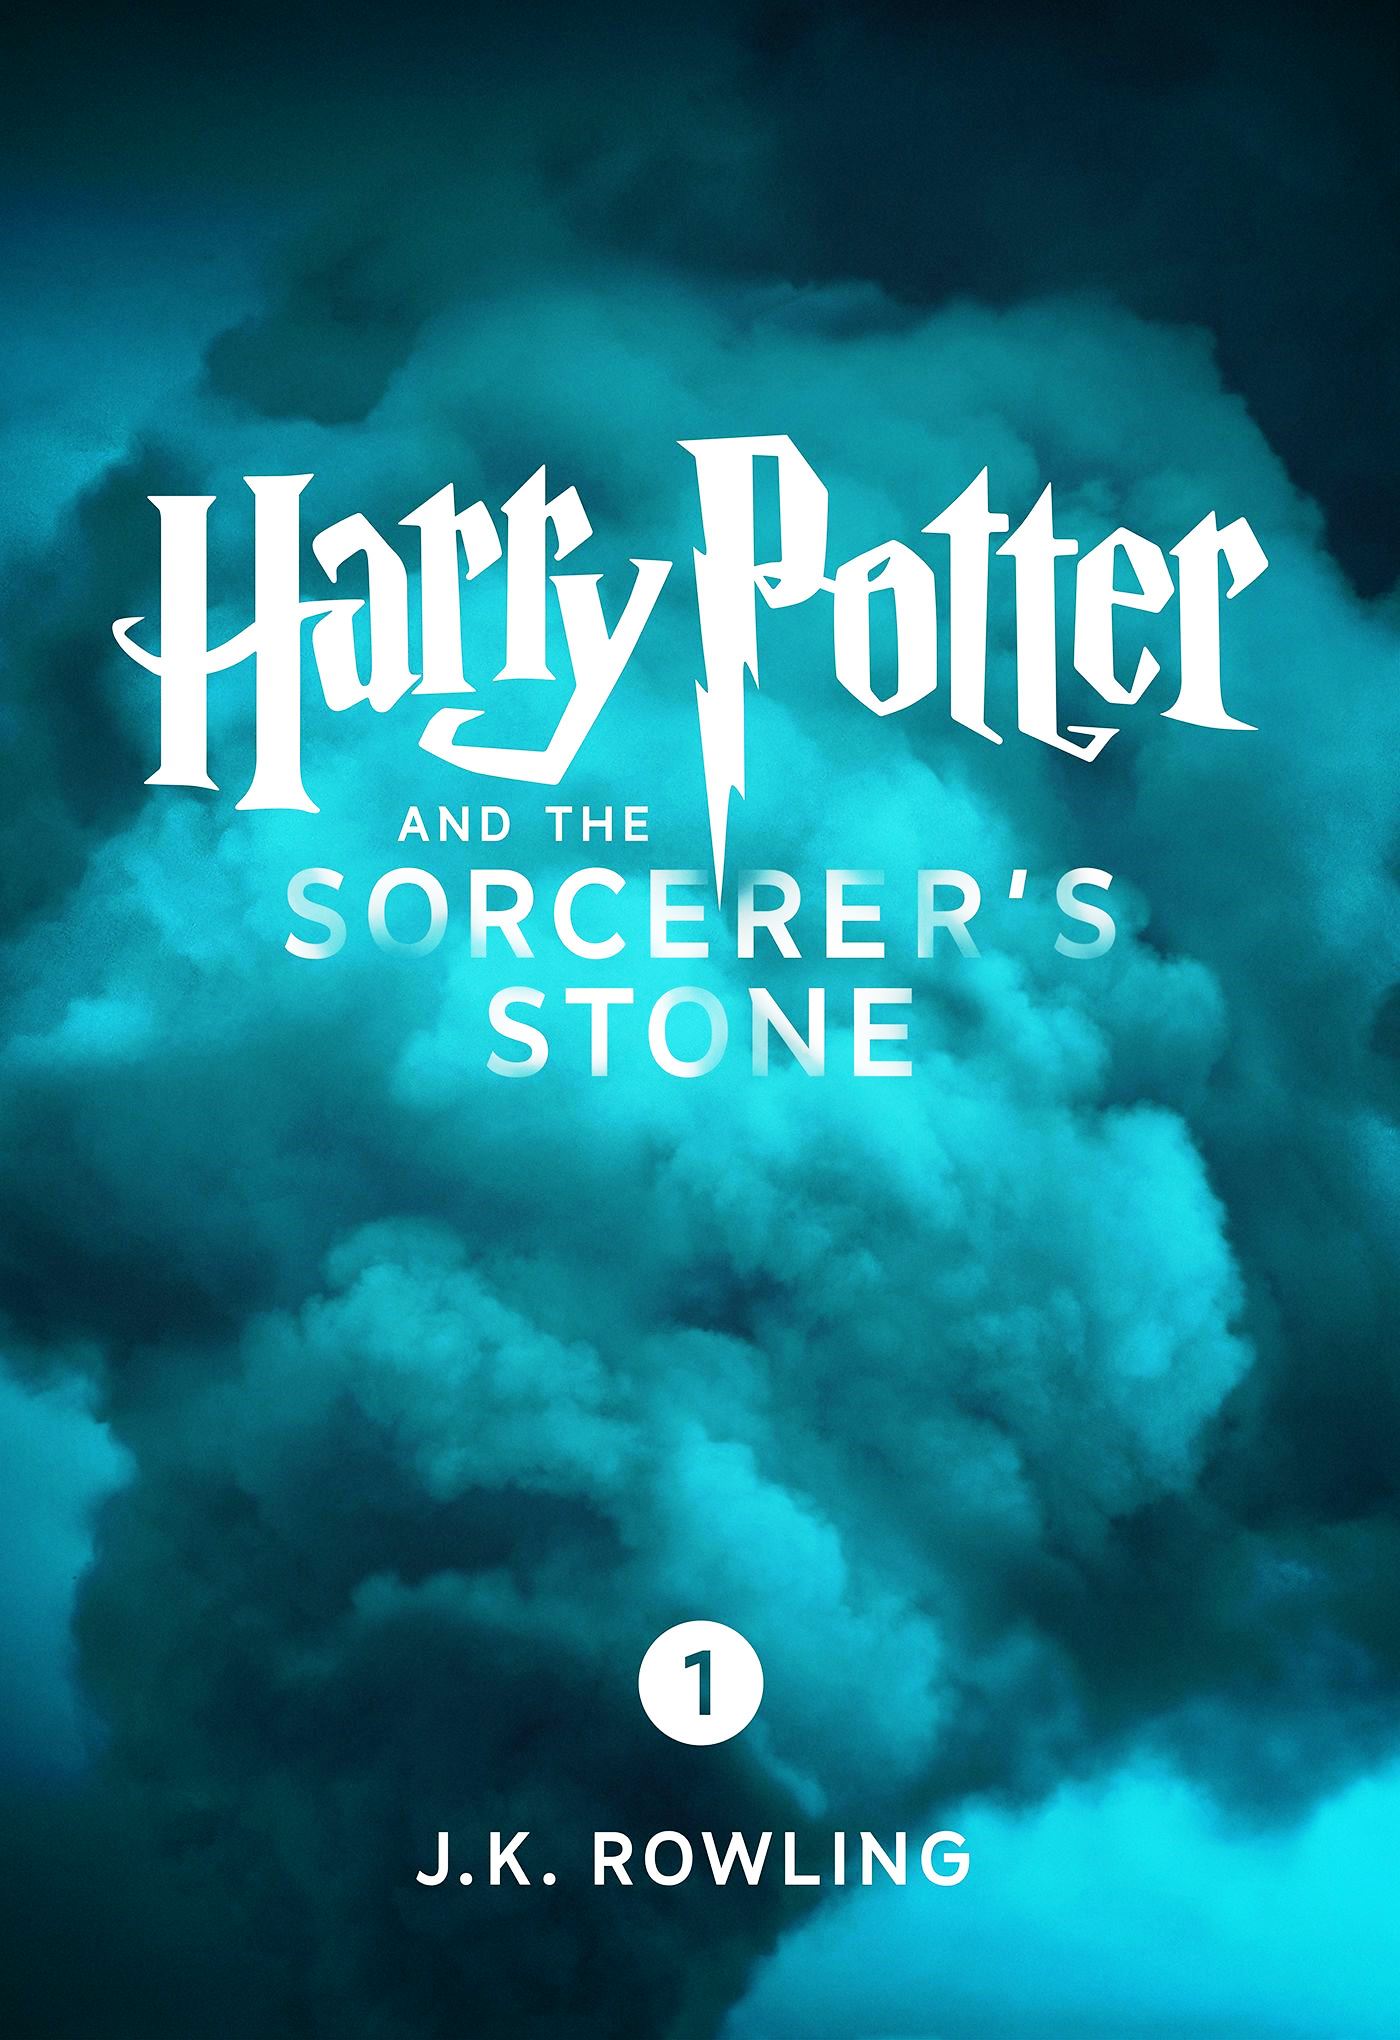 Harry Potter and the Sorcerer’s Stone Free Online Audiobook